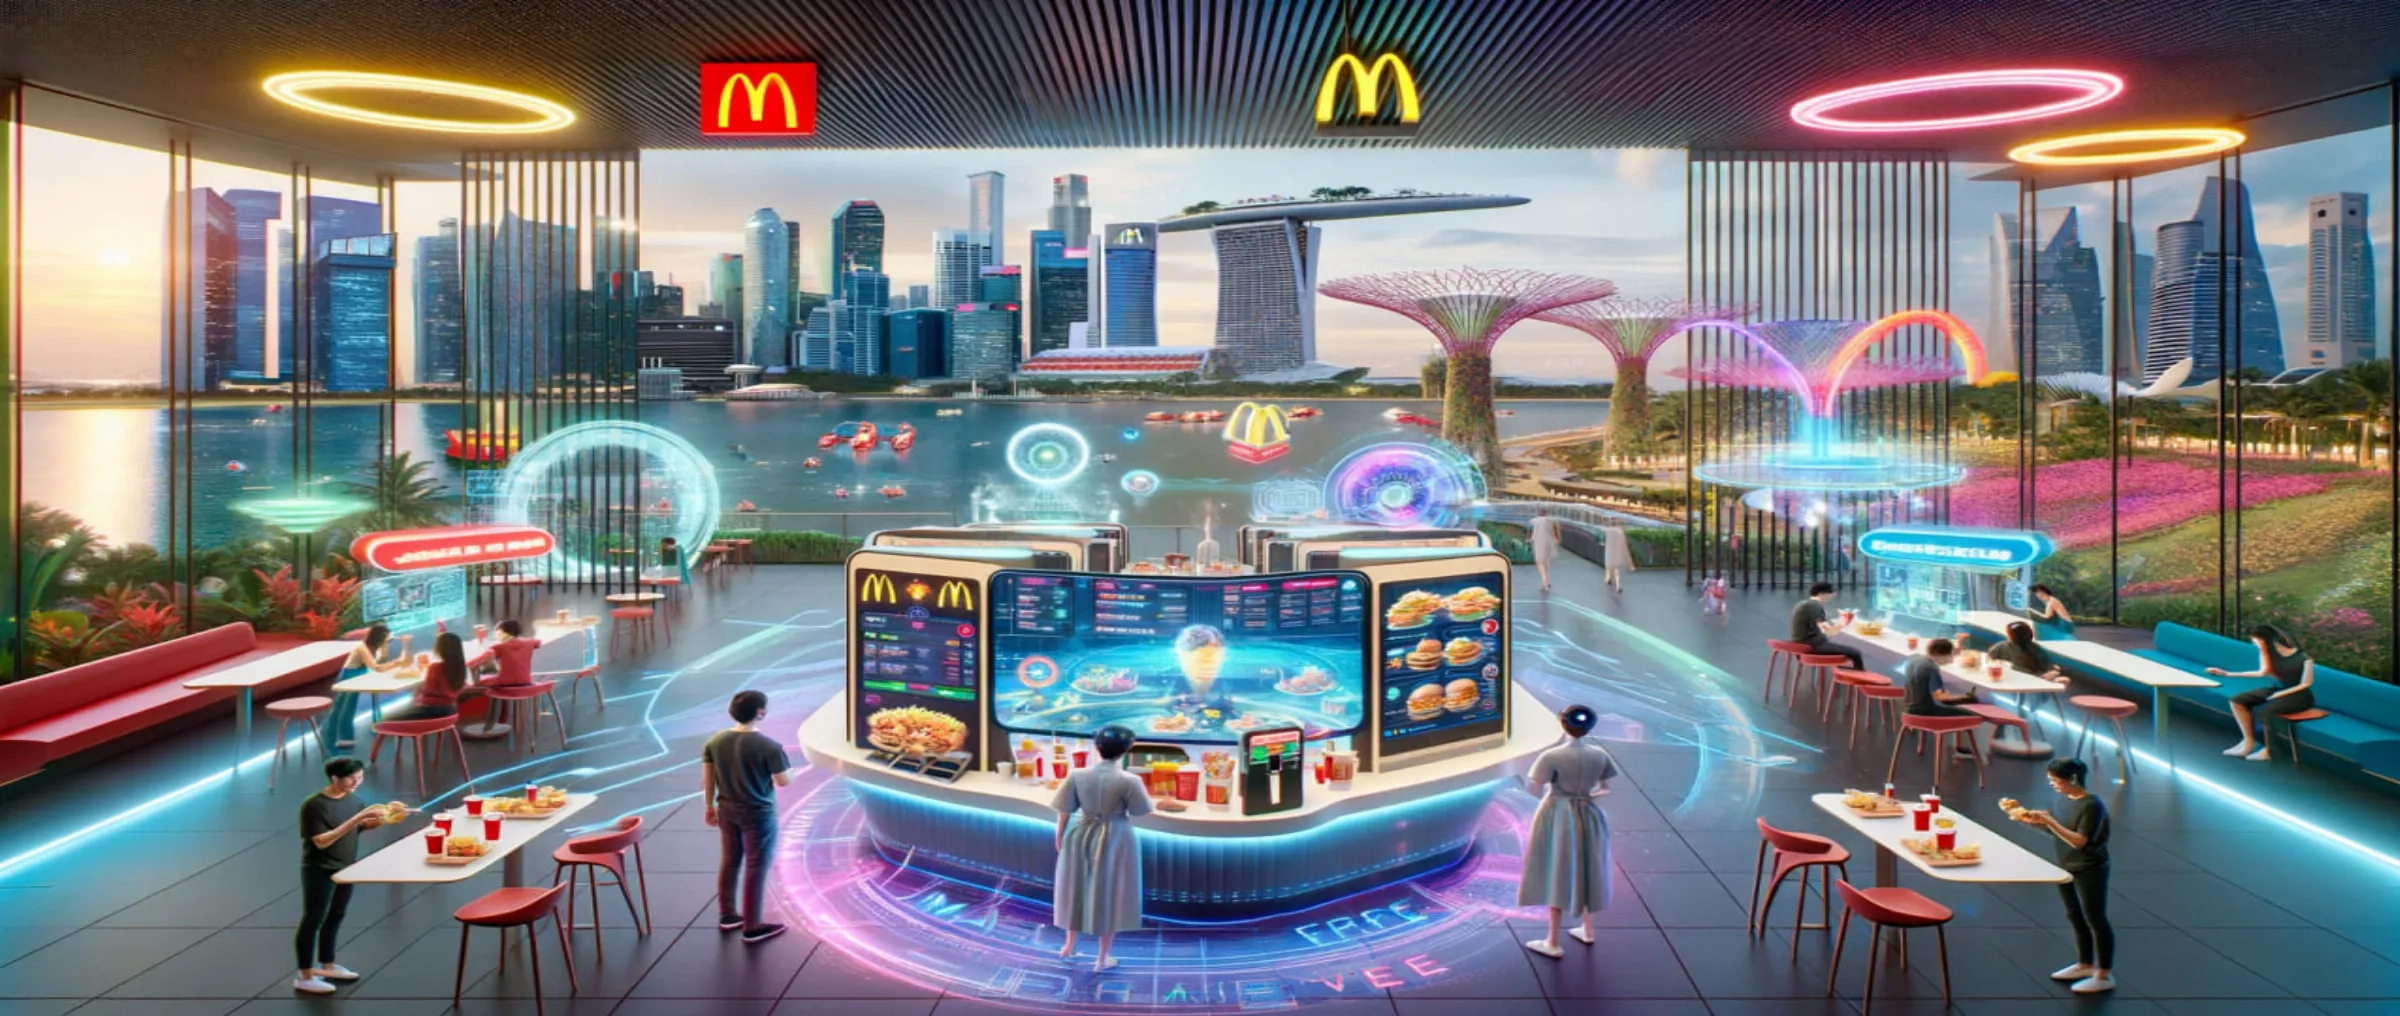 McDonald’s launches a metaverse in Singapore